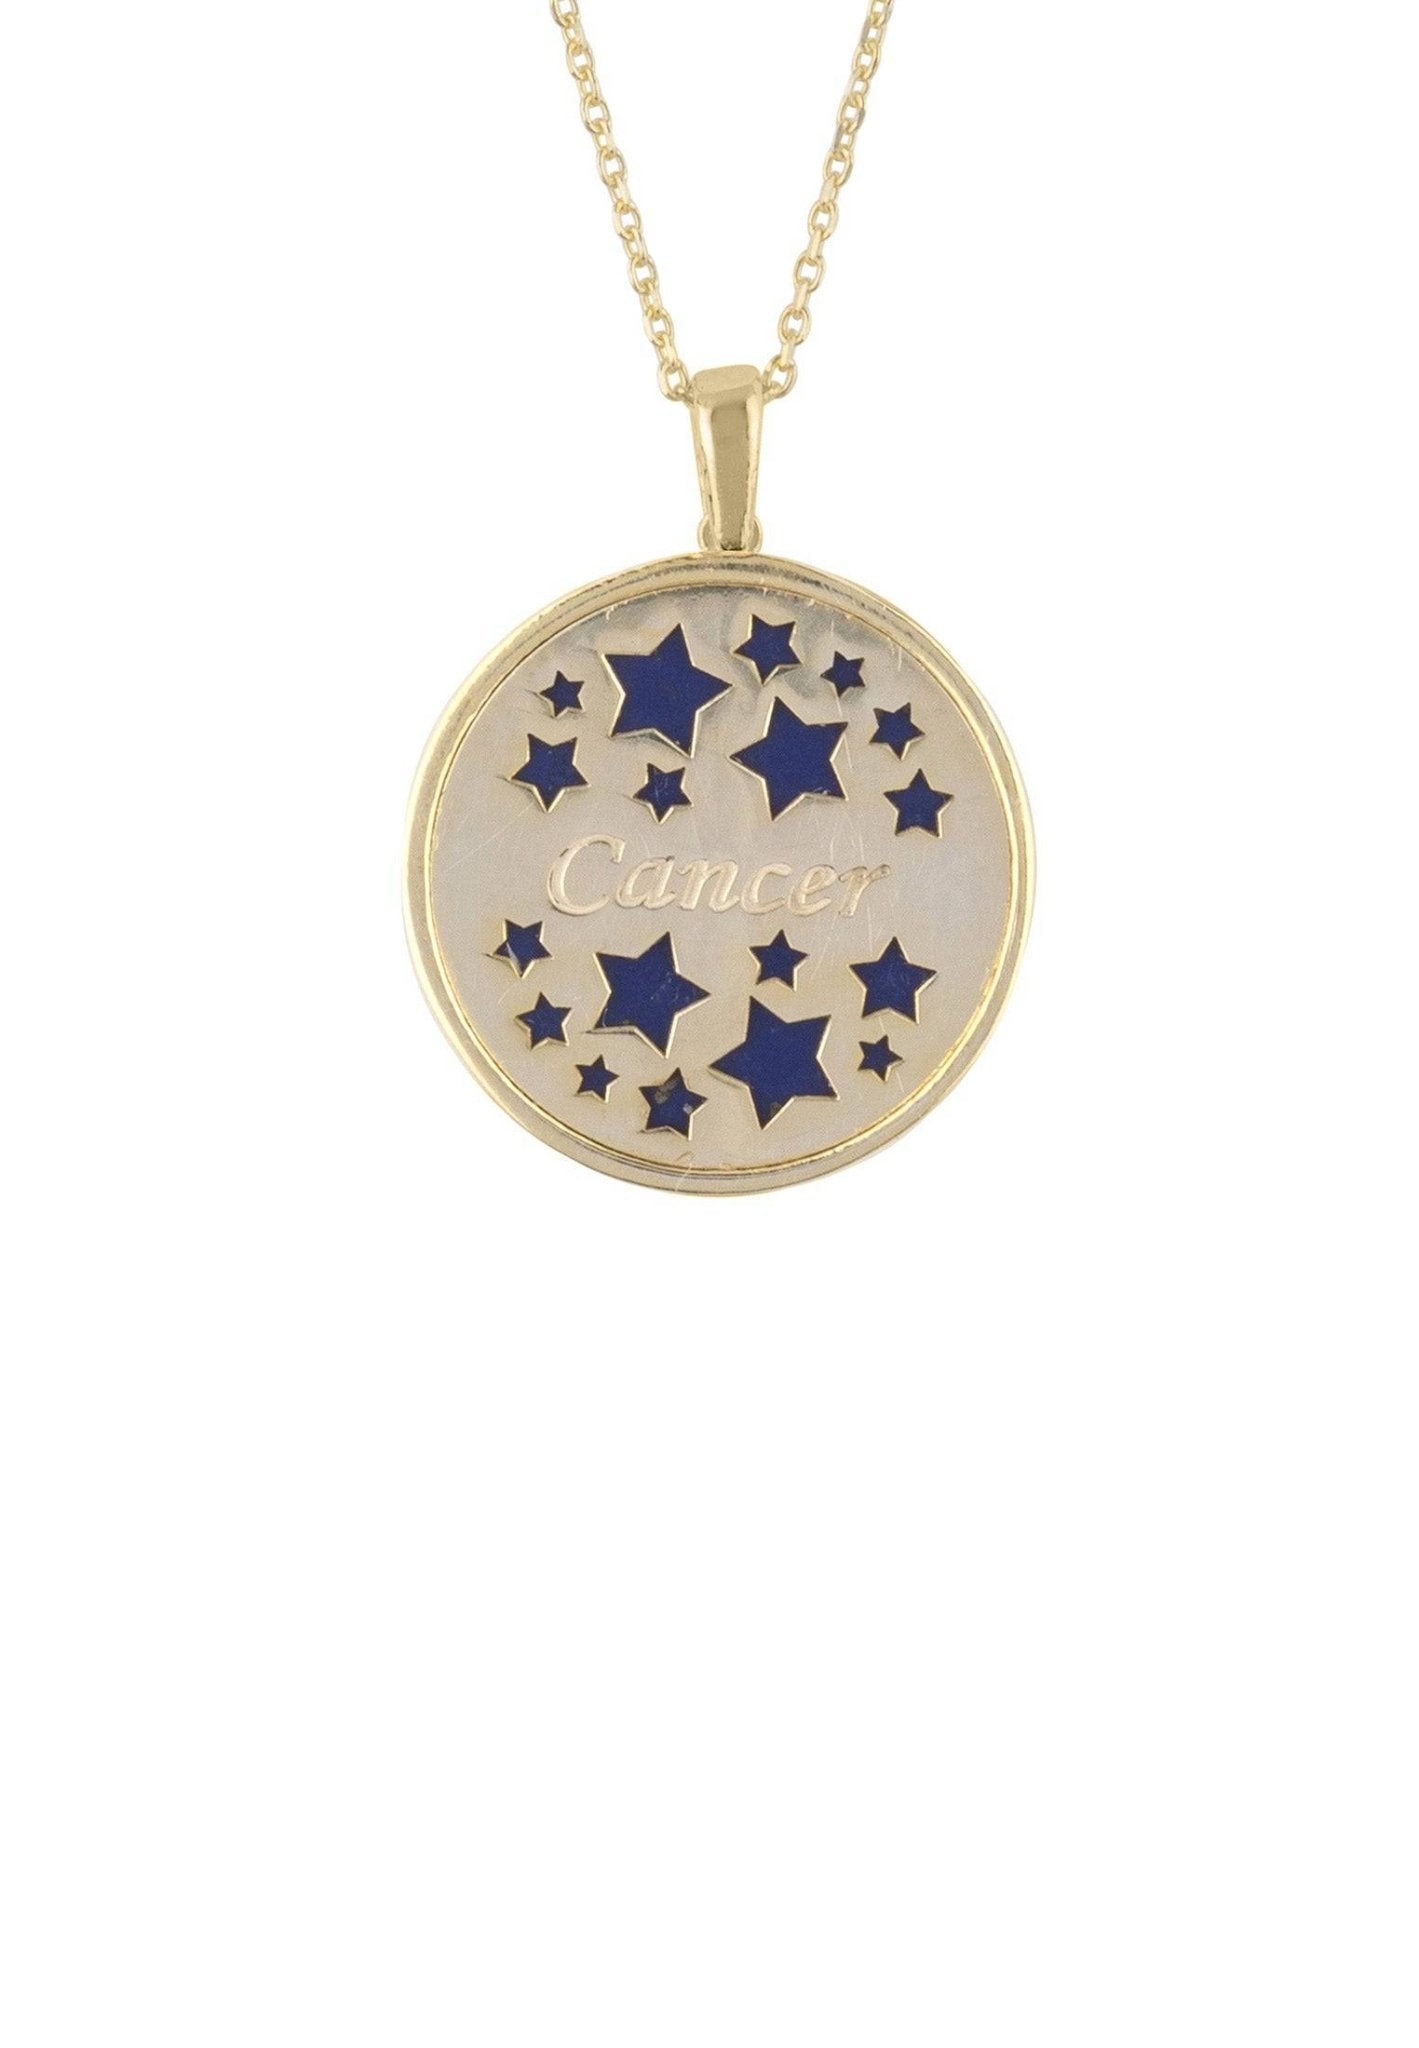 Personalized Necklaces - Zodiac Lapis Lazuli Star Constellation Pendant Necklace Gold Cancer 